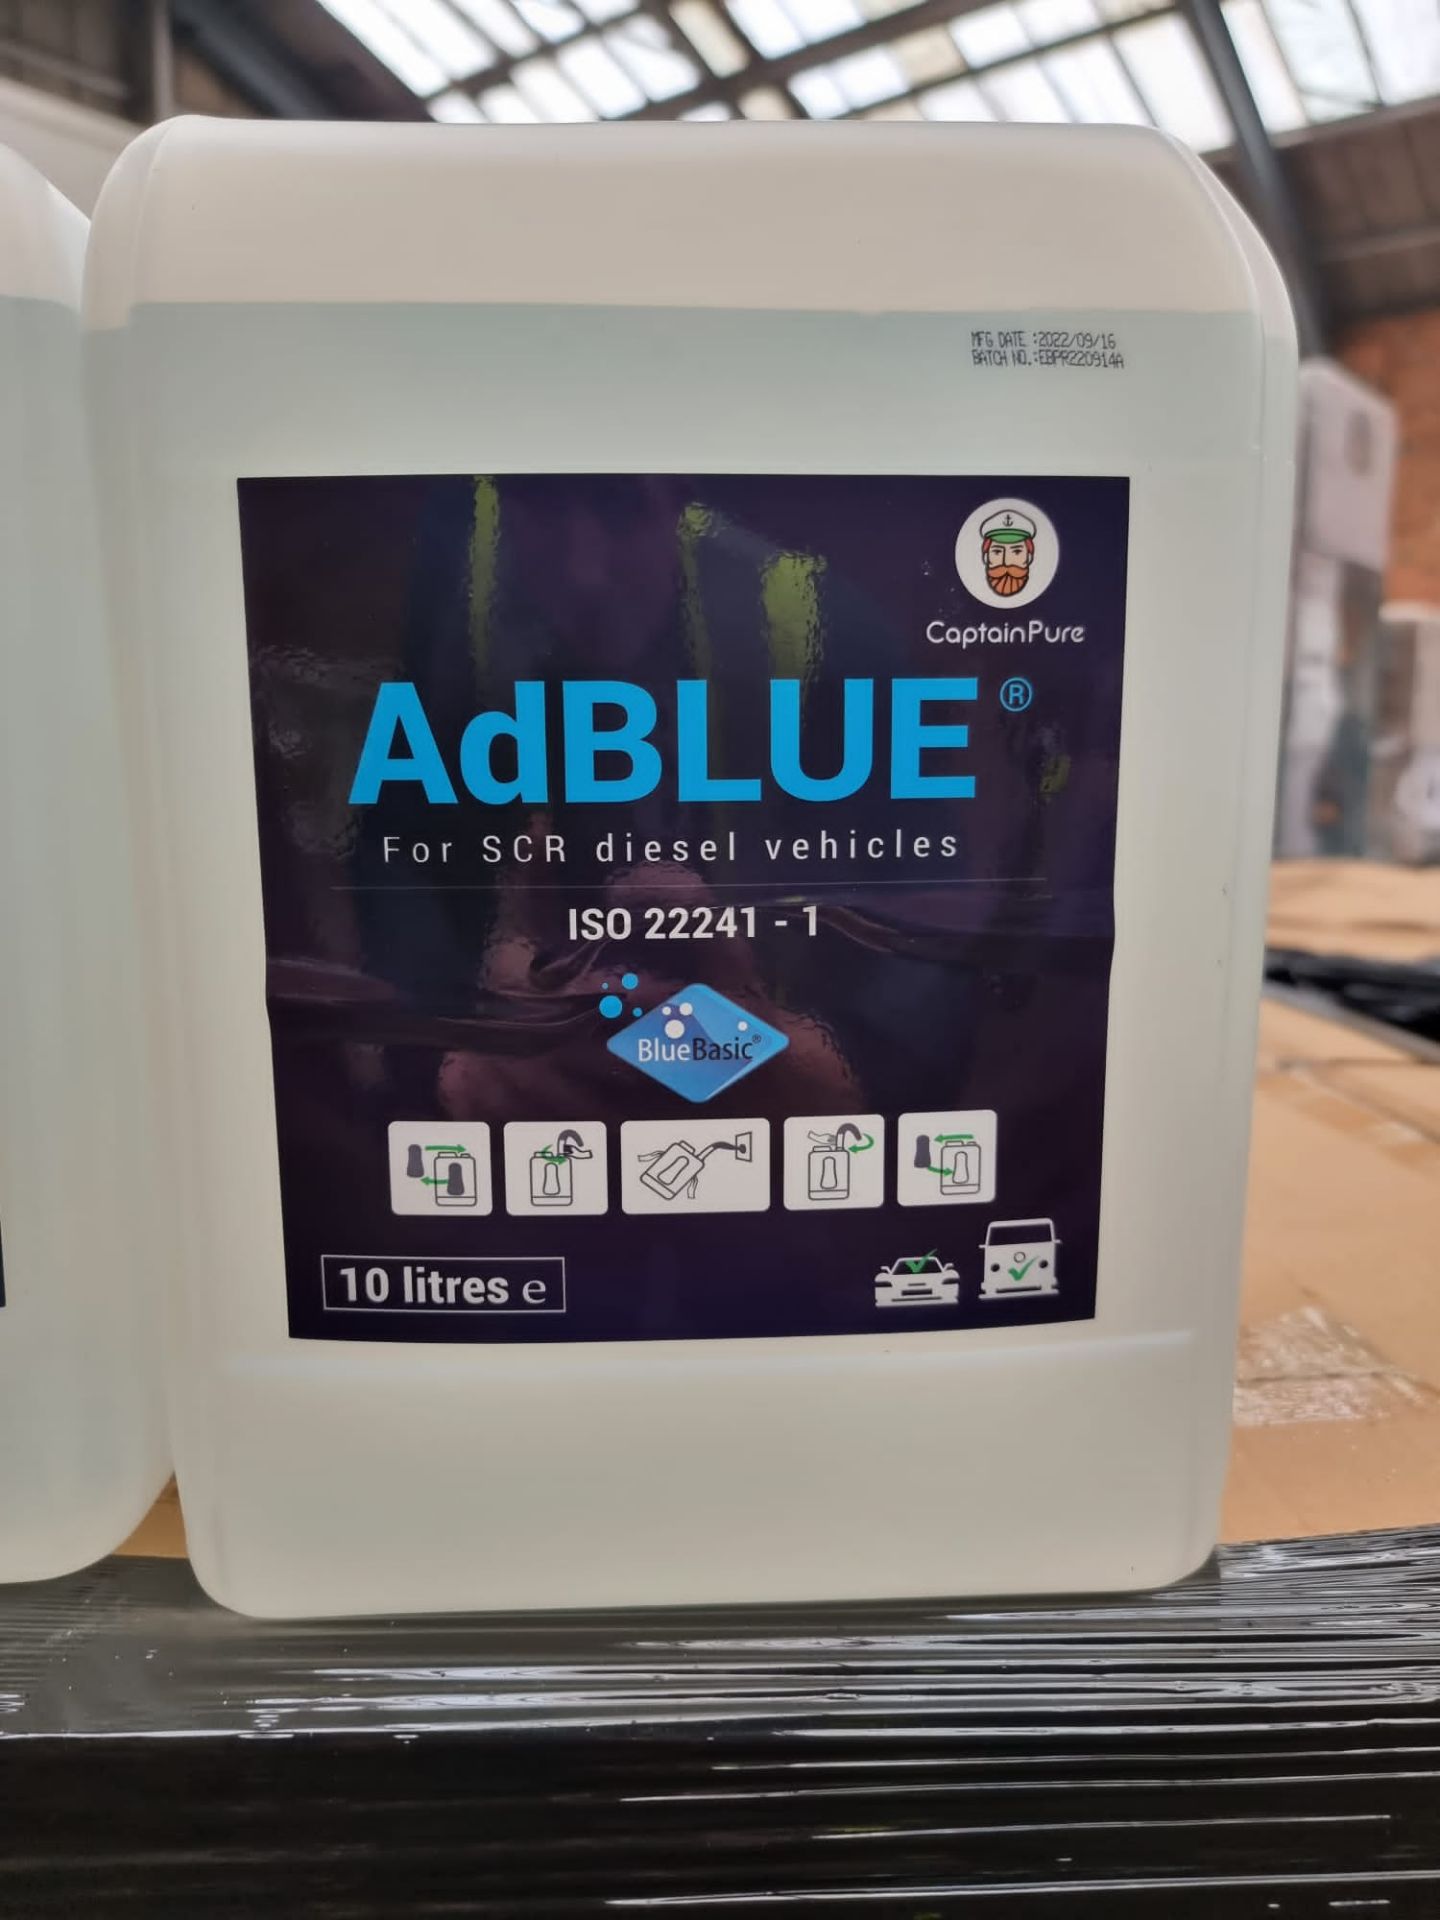 12 x NEW SEALED 10L TUBS OF ADBLUE FOR DIESEL VEHICLES. INCLUDES NOZZLE. AdBlue is the registered